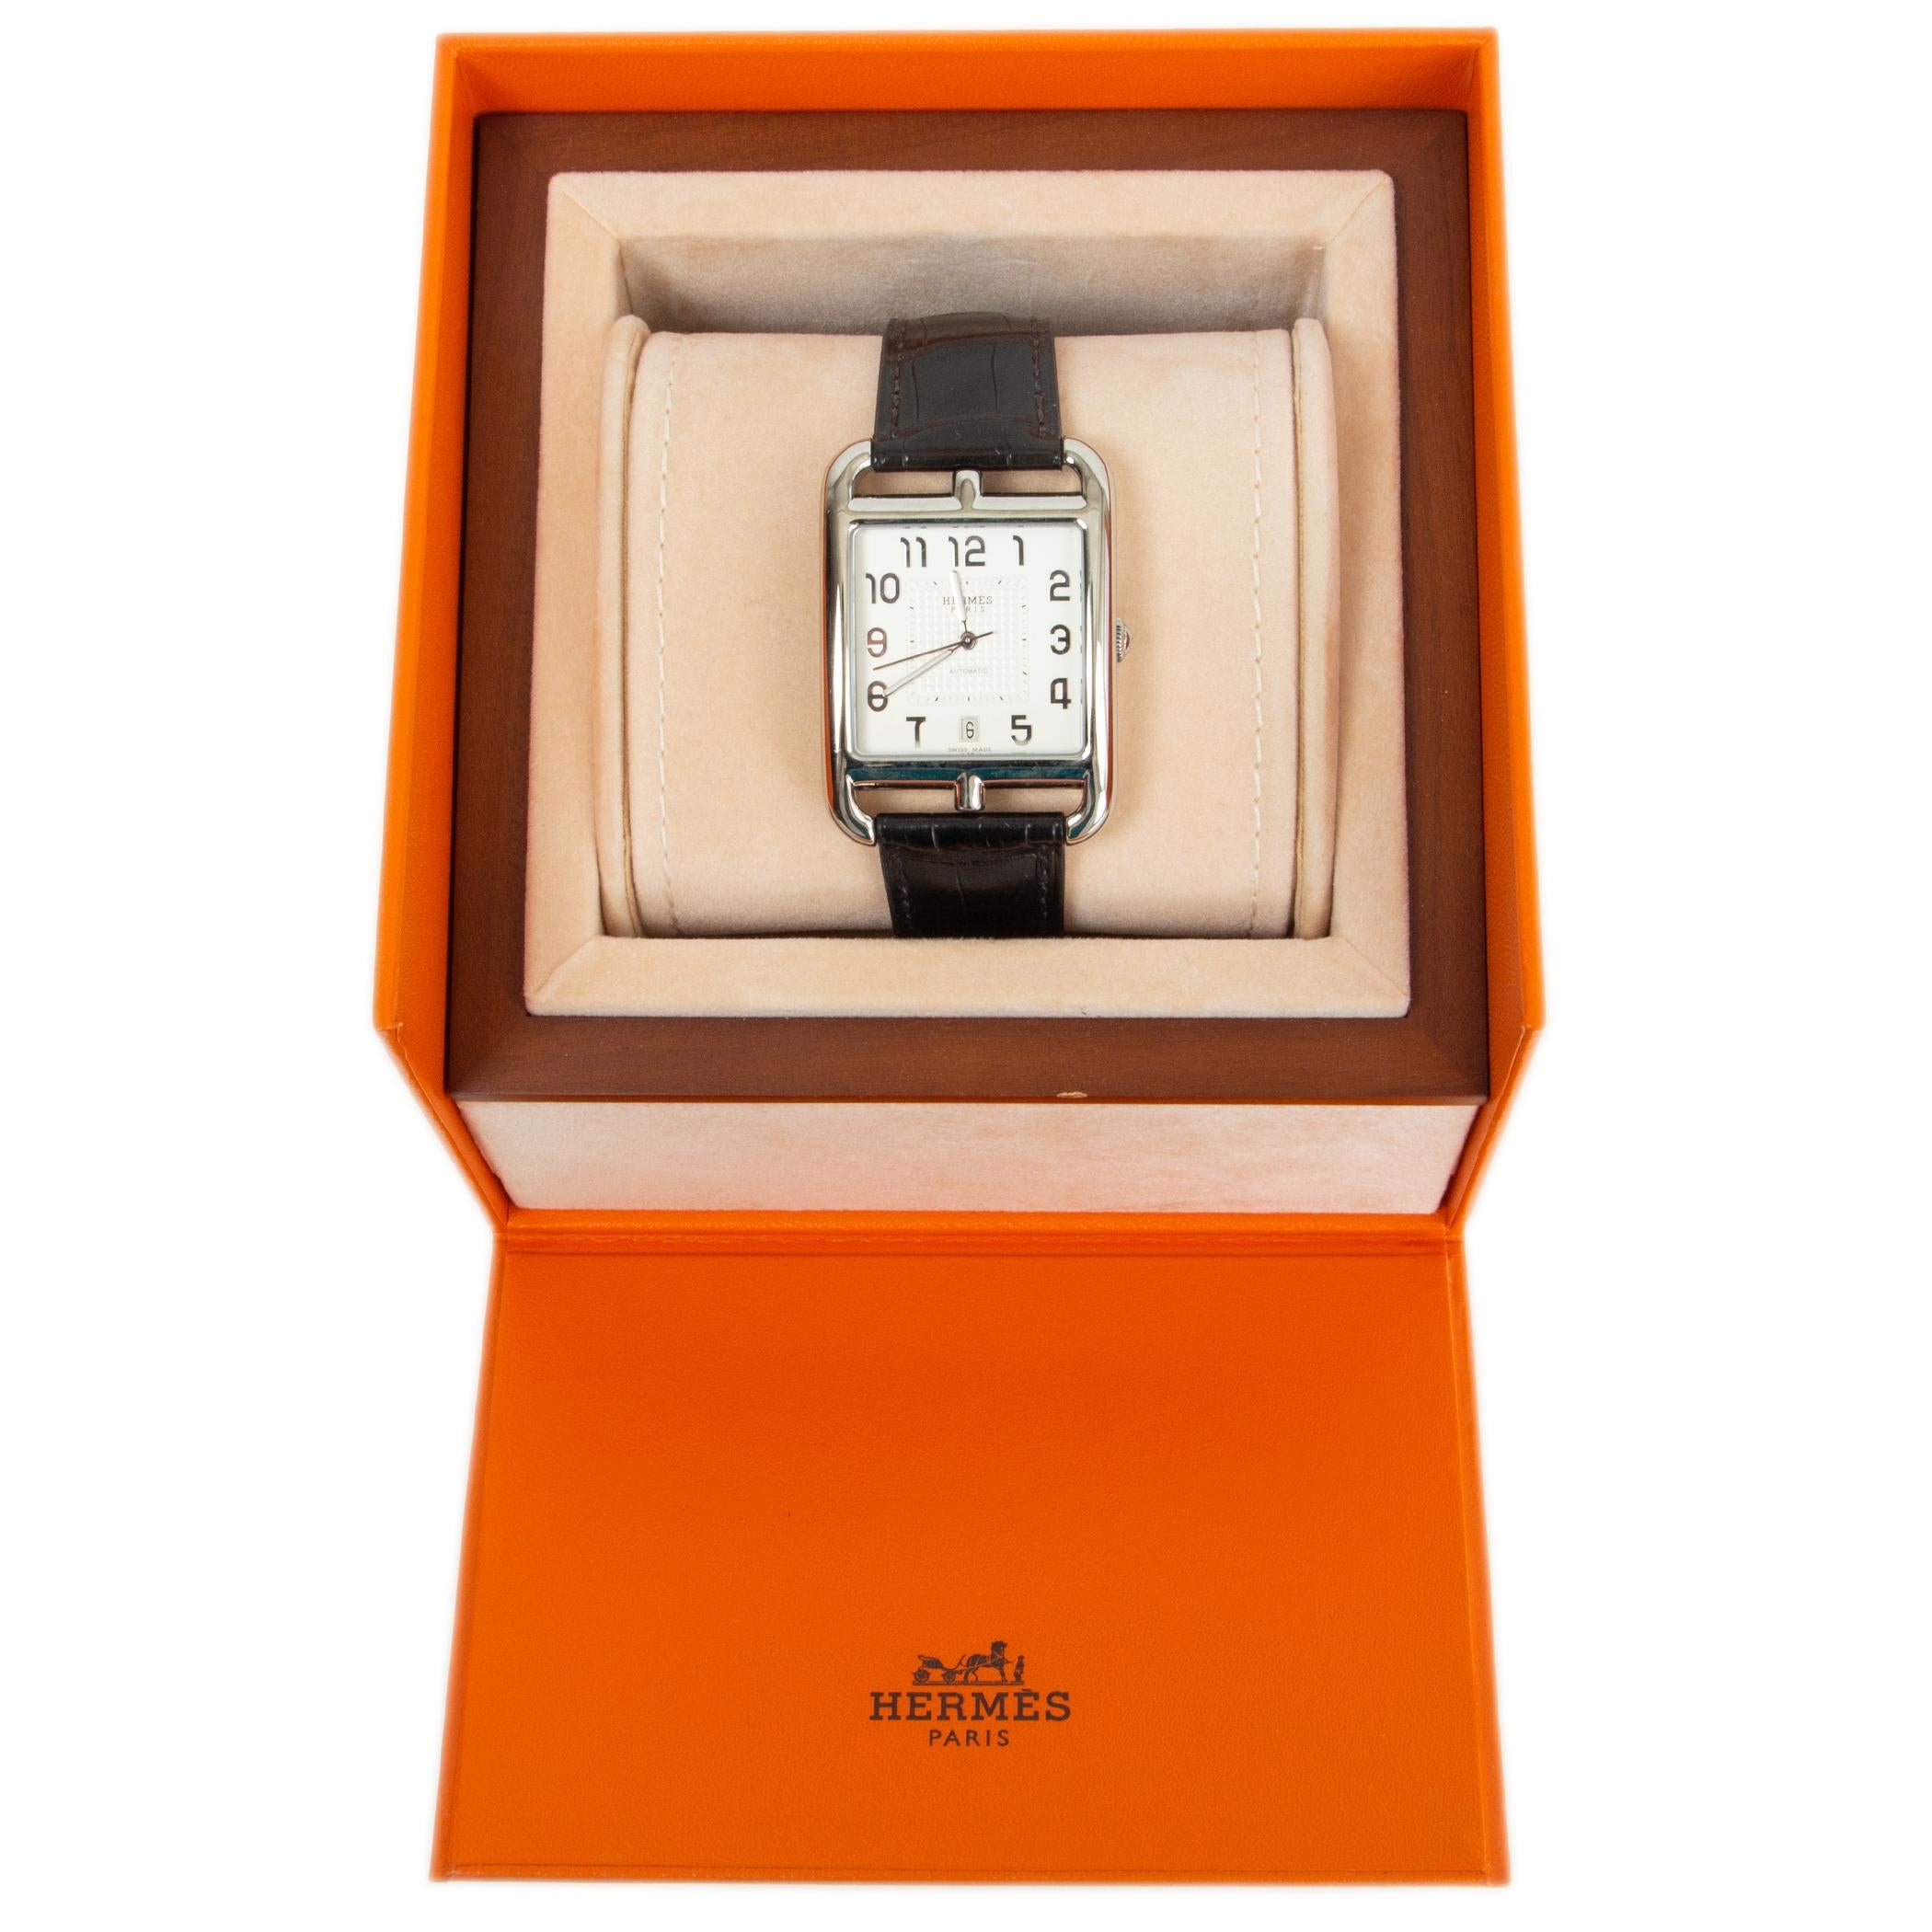 100% authentic Hermès Cape Cod 33mm polished stainless steel case watch. Black alligator leather strap with a steel folding clasp. Opaline silvered dial, central stamped motif. Anti-glare sapphire crystal and case-back. Opaline silvered dial,